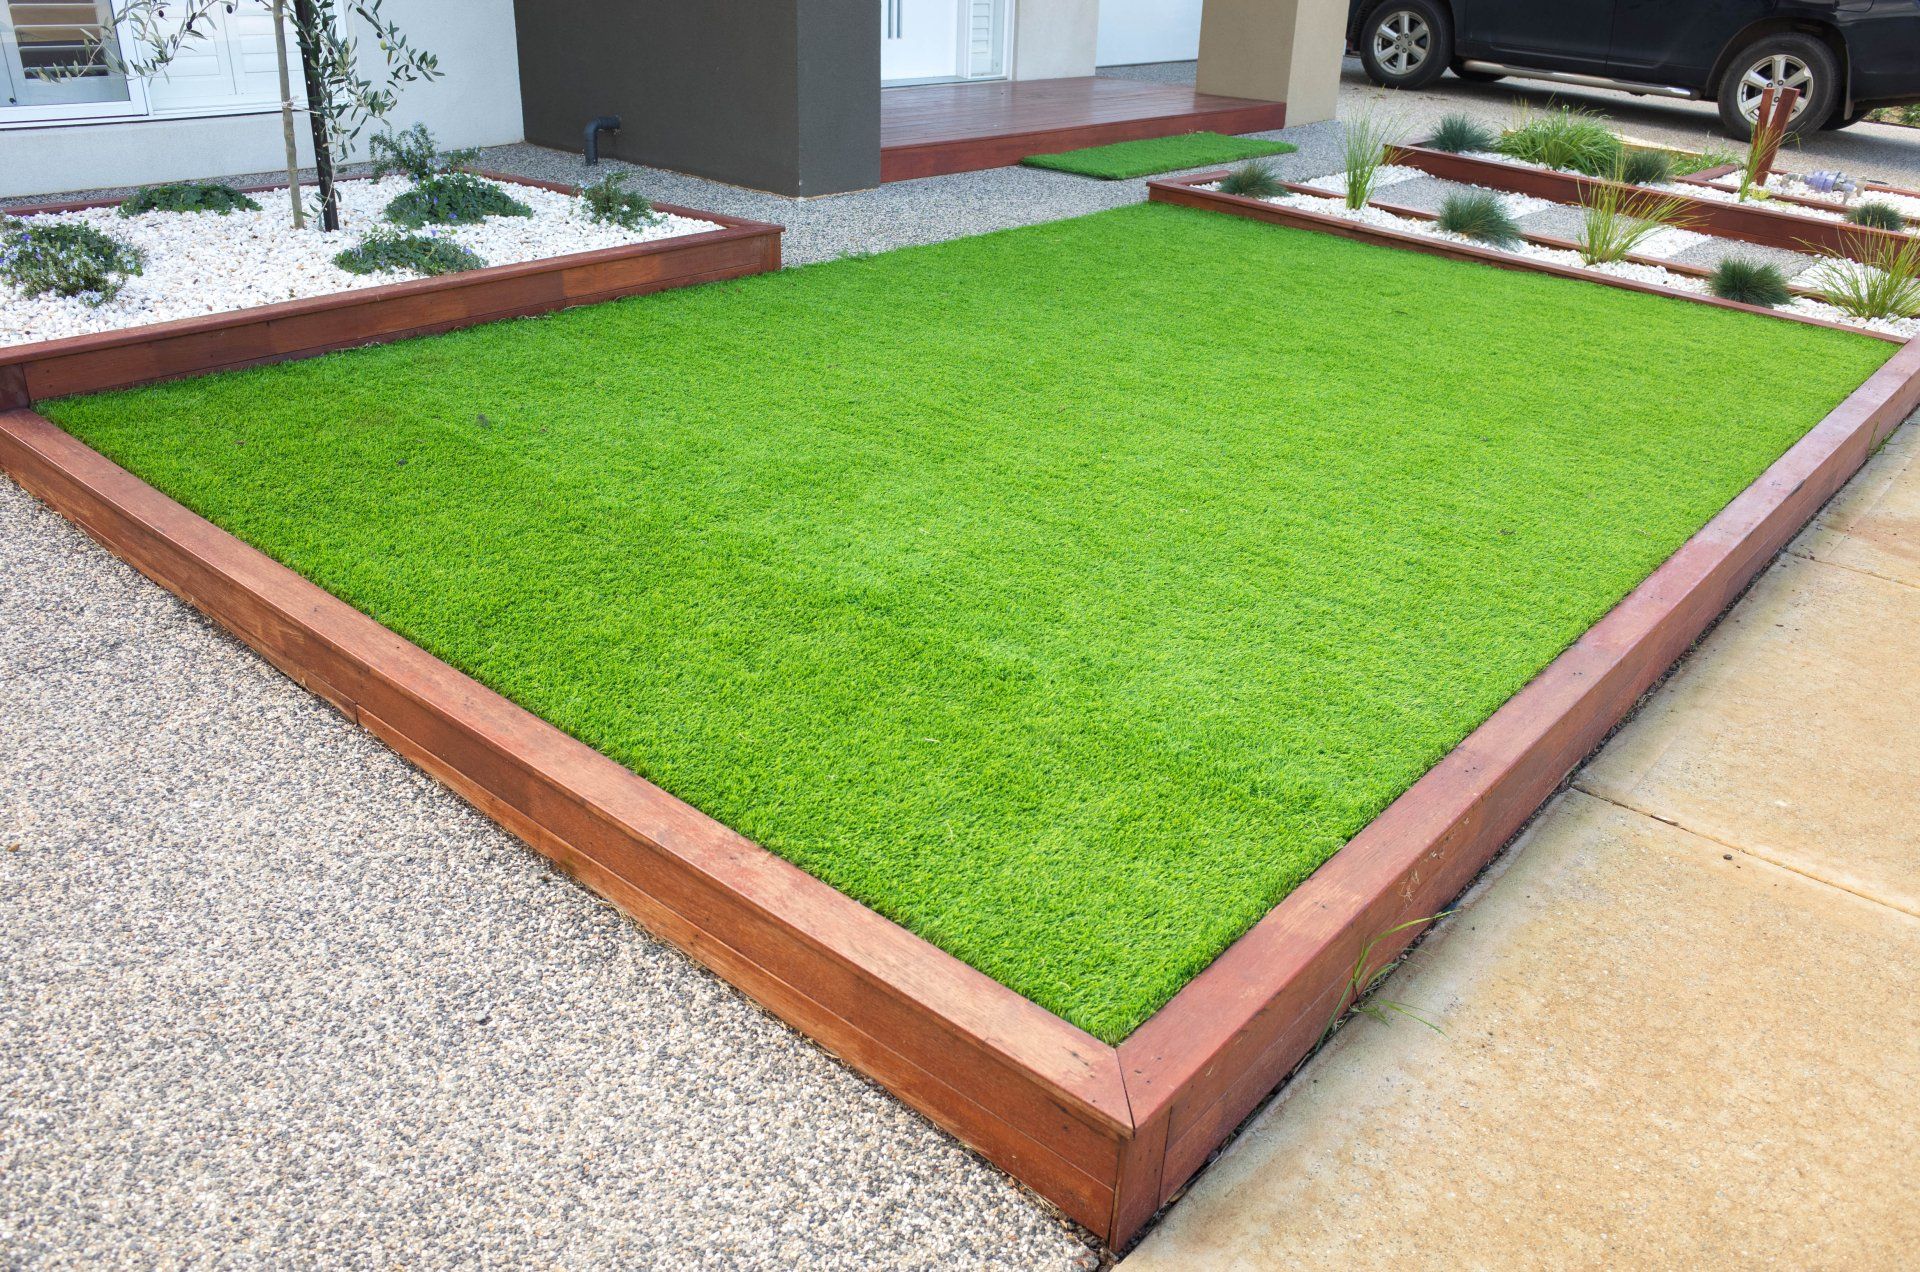 This artificial grass provides a soft playing surface and allows players to exert less joint pressure while playing.